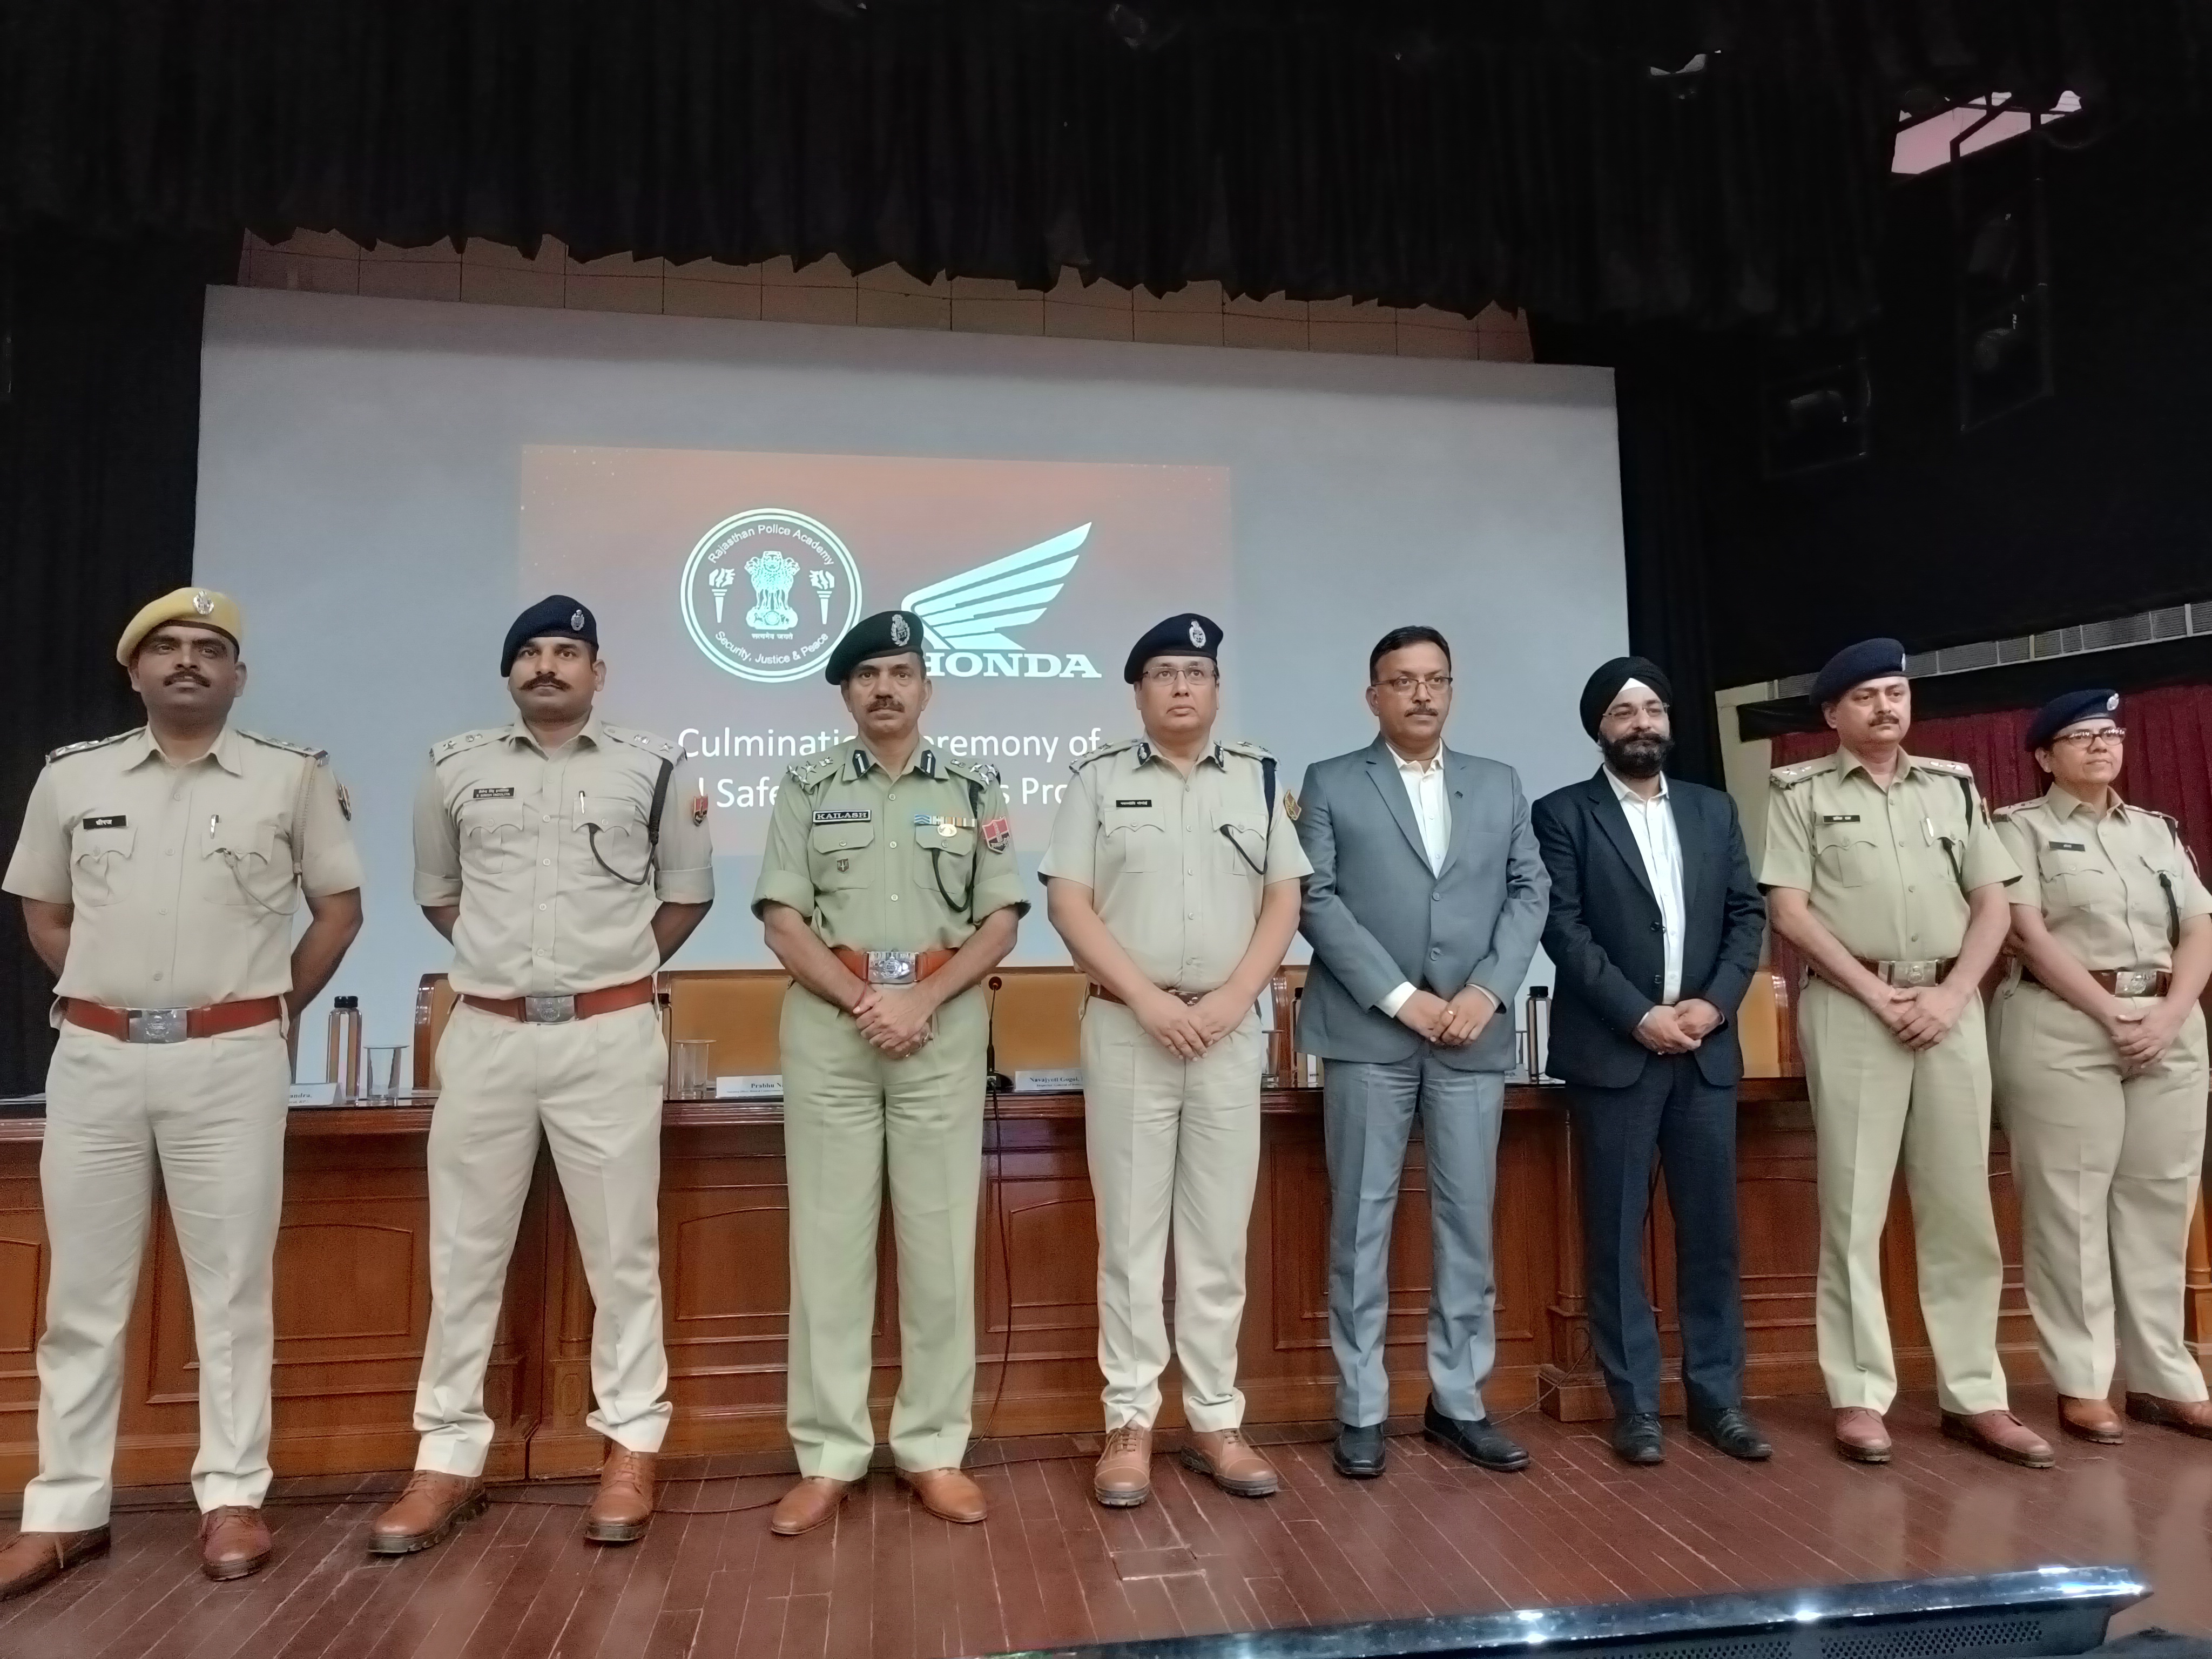 Honda Motorcycle & Scooter India in association with Rajasthan State Police culminates road safety awareness drive in Jaipur decoding=